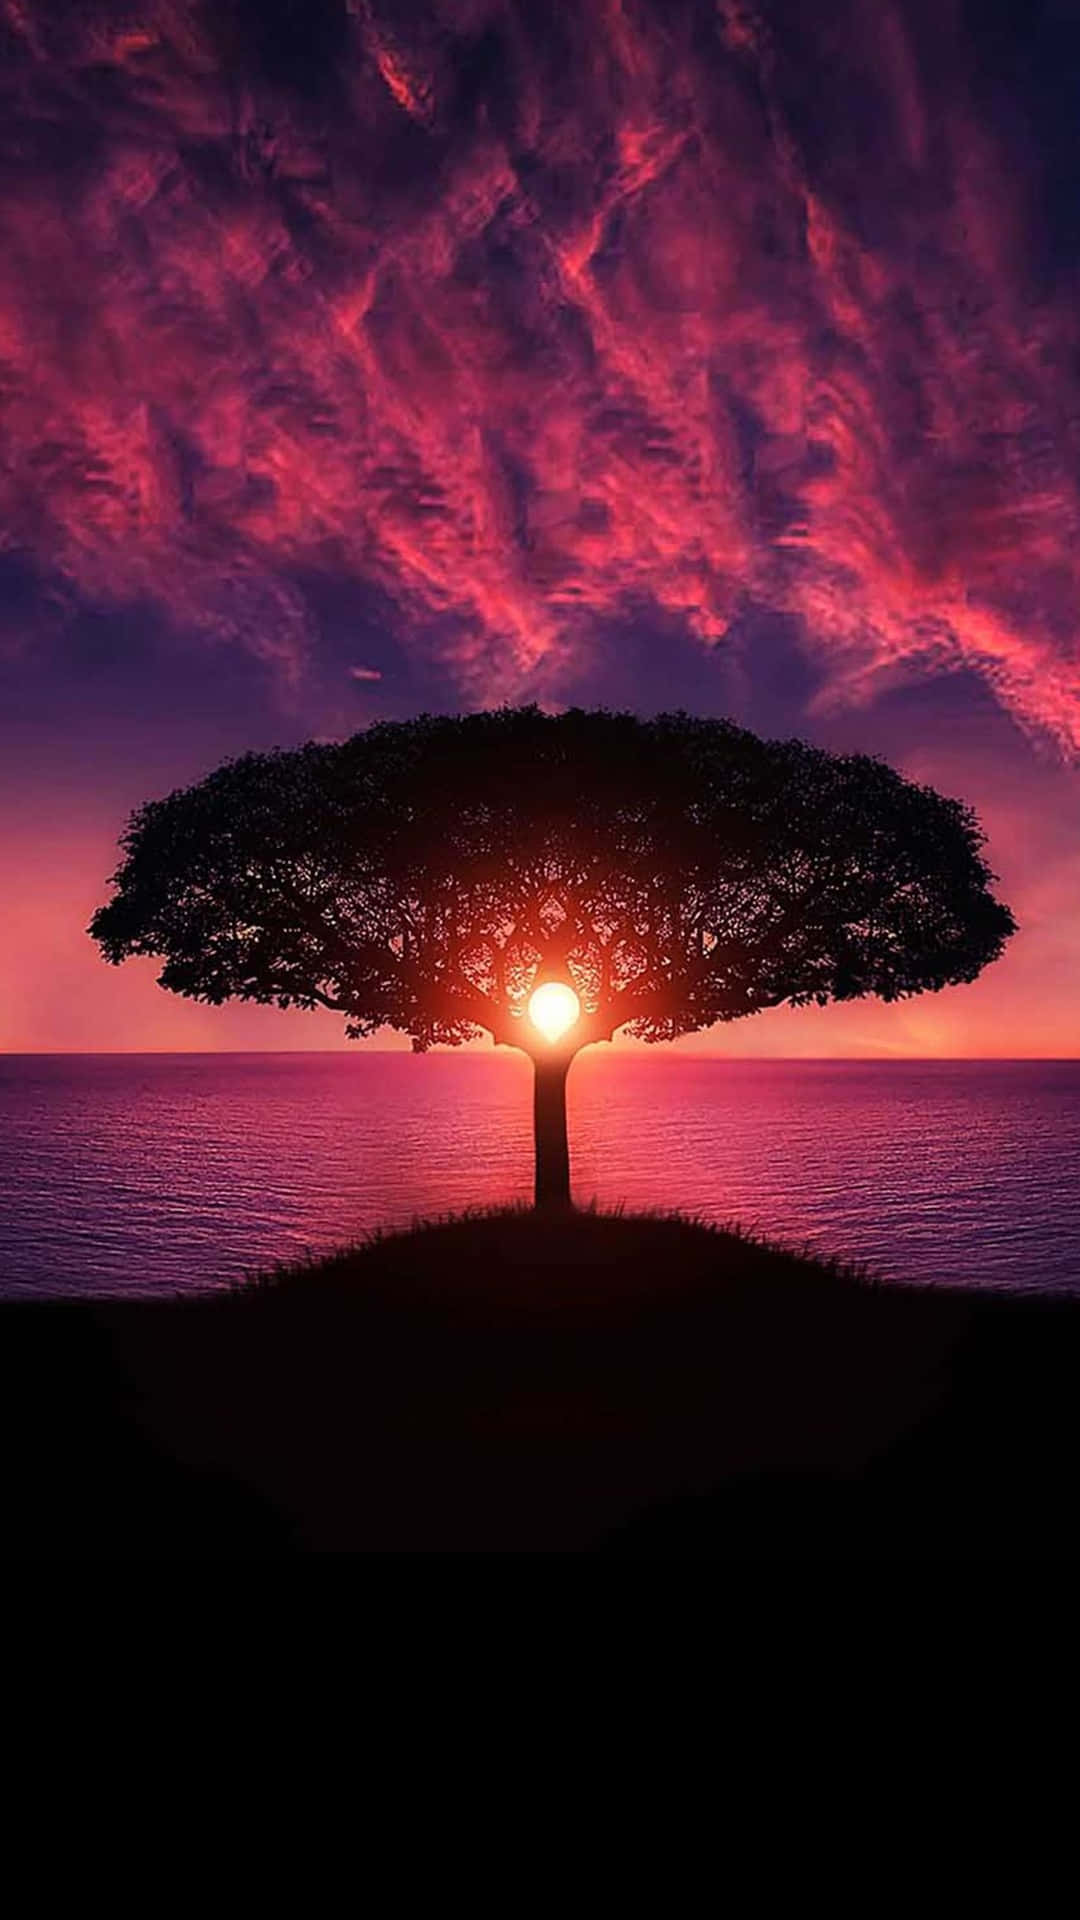 Tree Silhouette In Sunset Sky Colorful 4k Phone Background